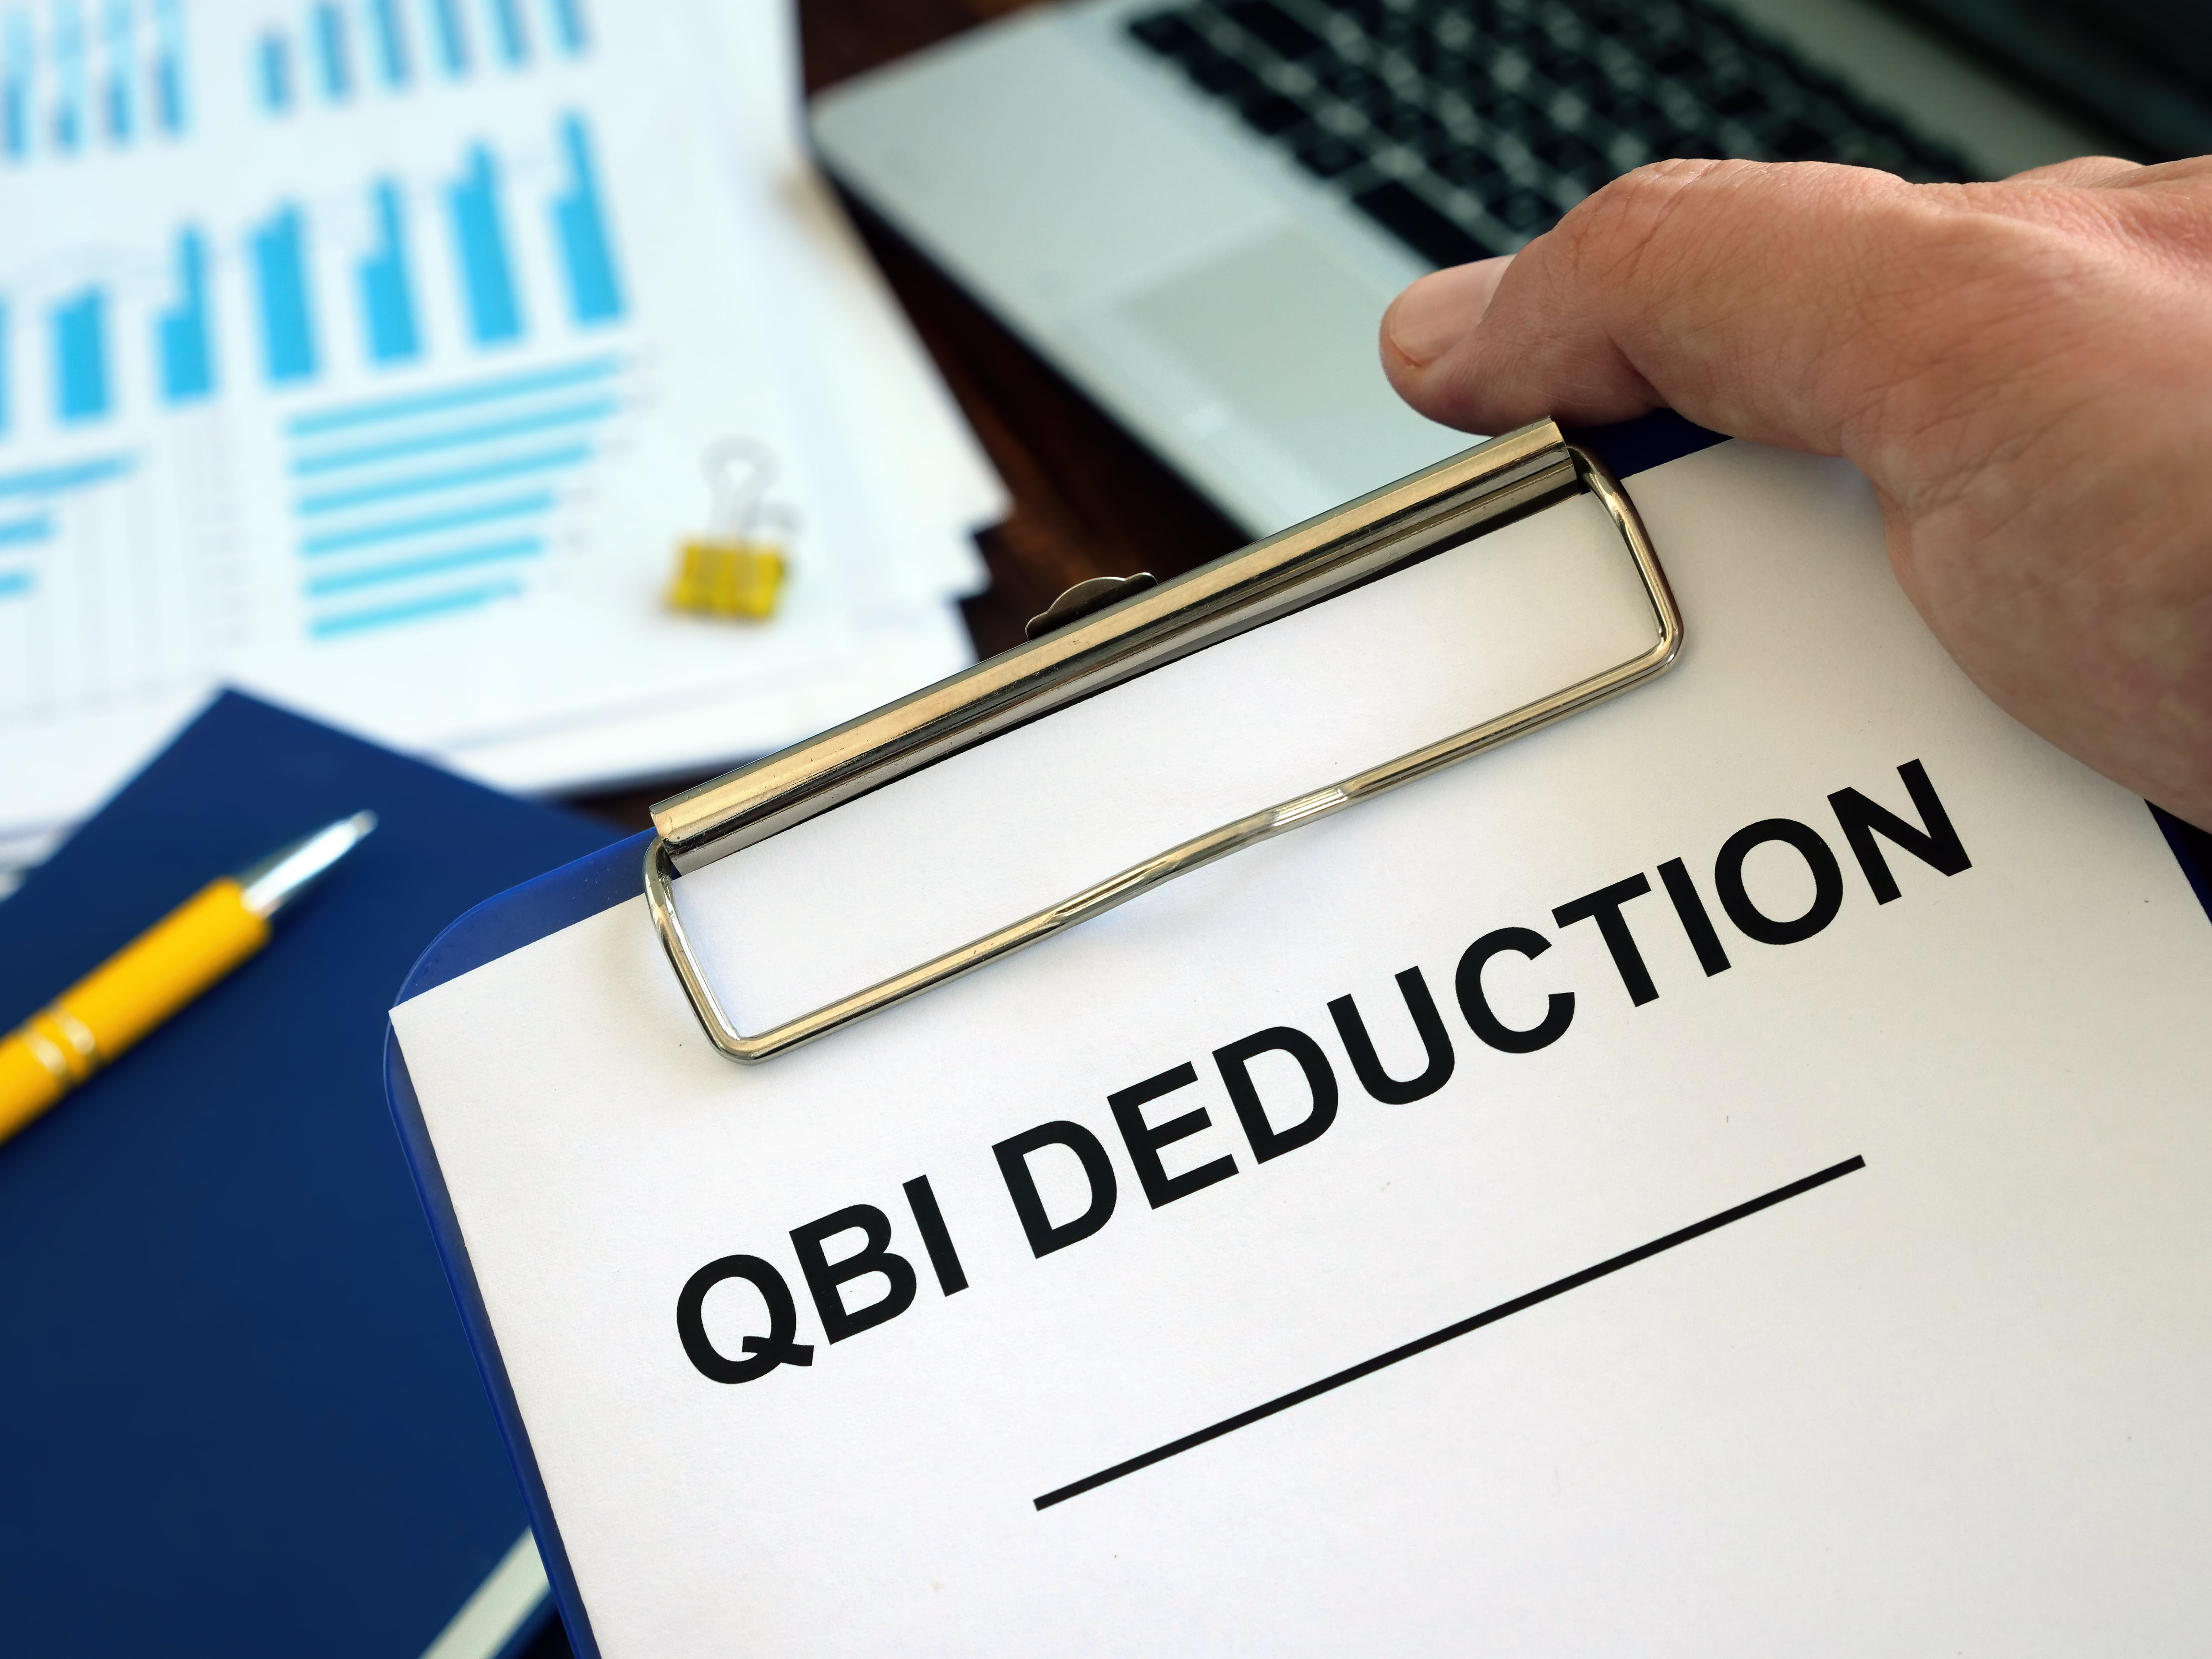 What you need to know about the QBI deduction